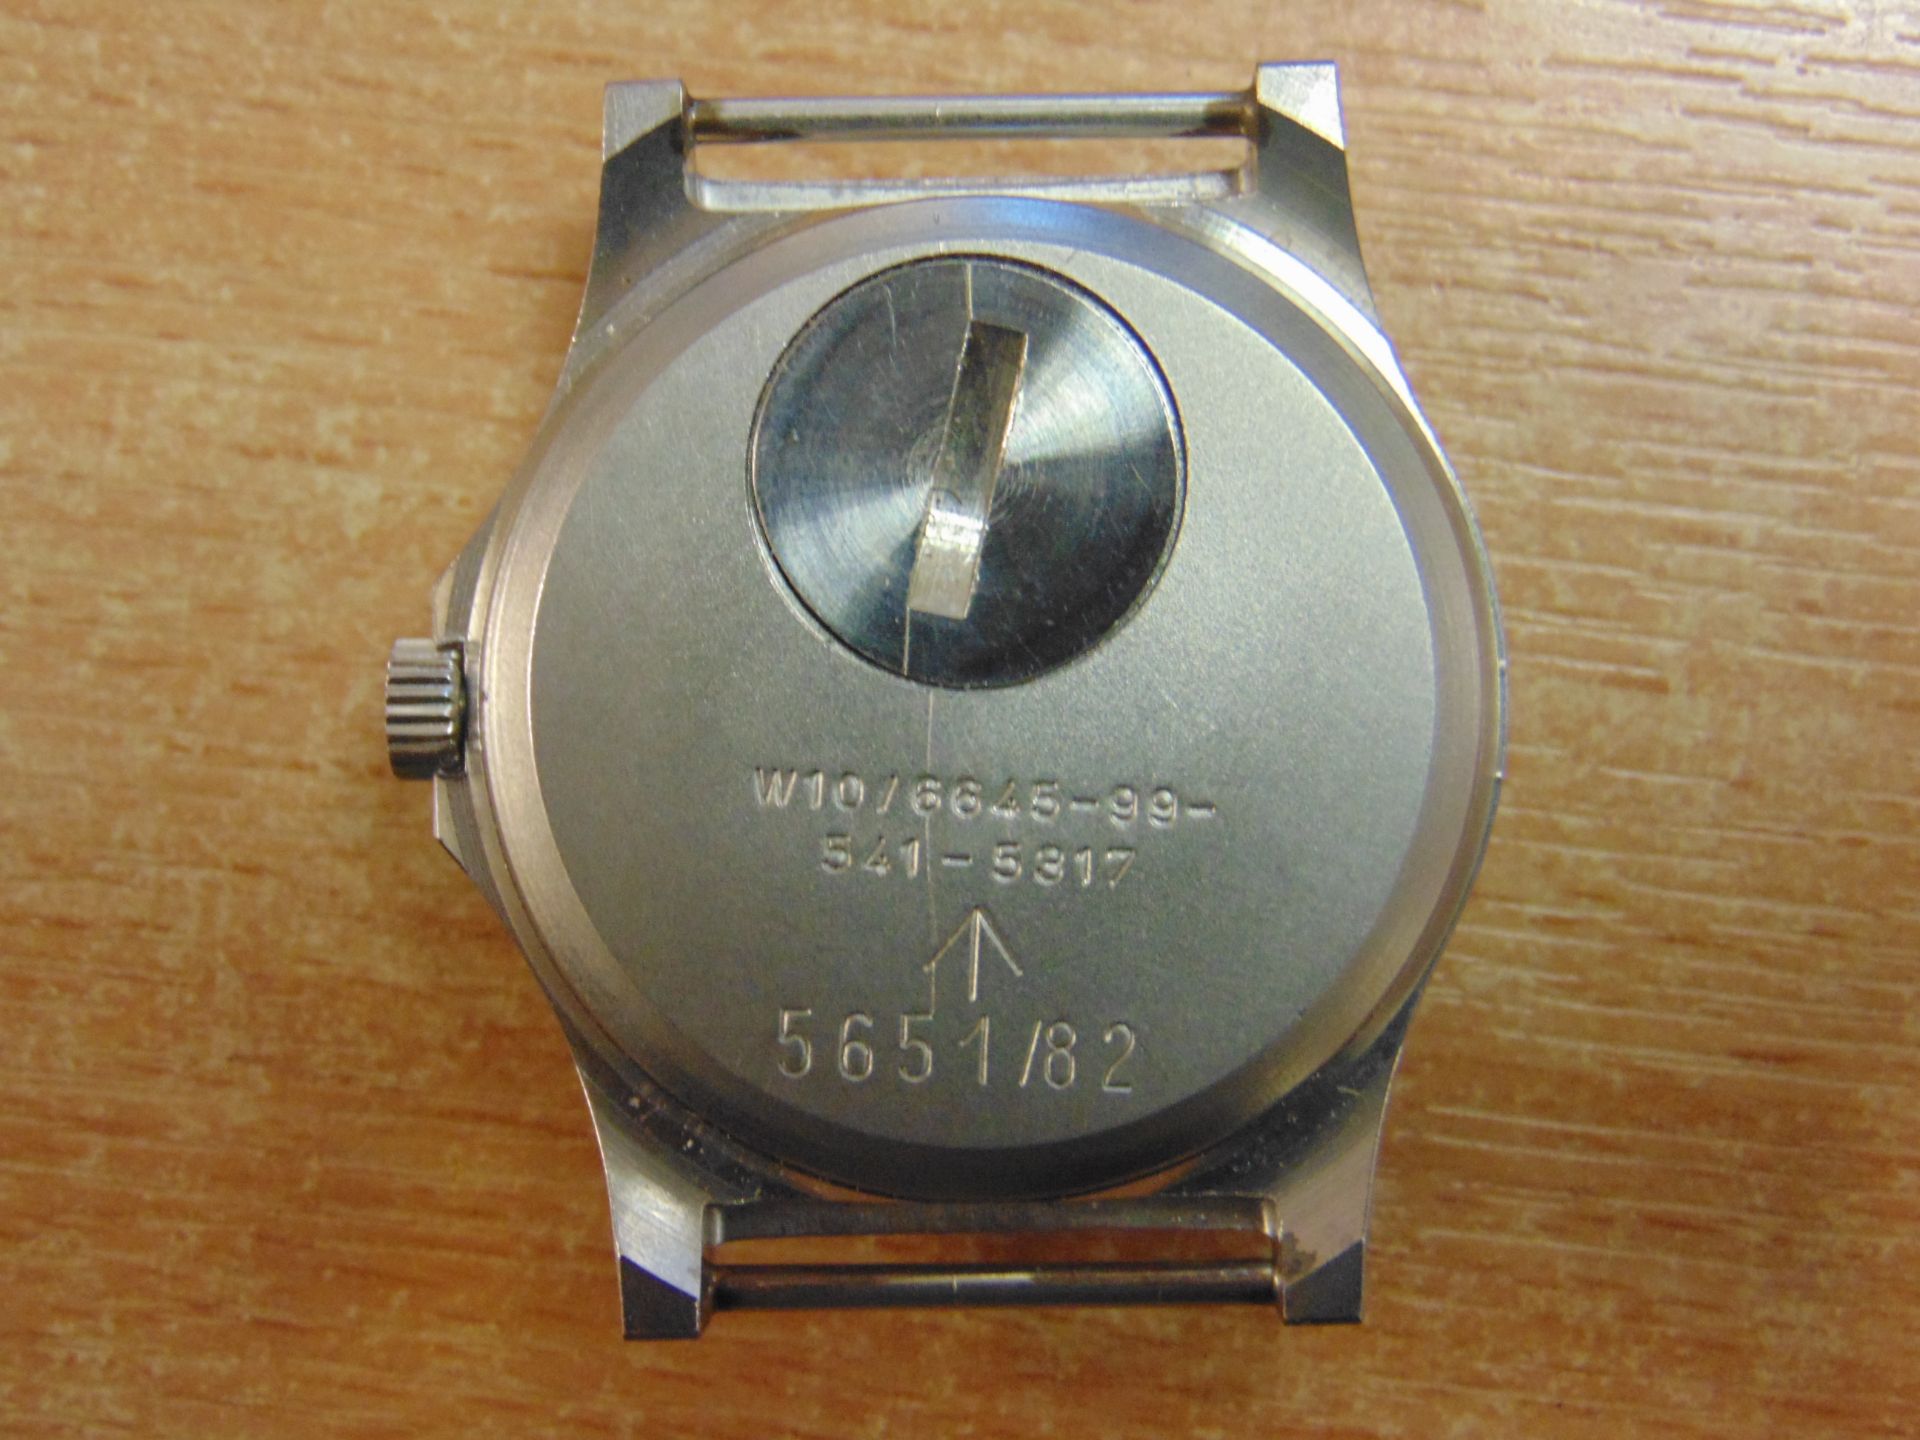 VERY RARE UNISSUED CWC W10 FAT BOY SERVICE WATCH NATO MARKED DATED 1982 - FALKLANDS WAR - Image 6 of 10